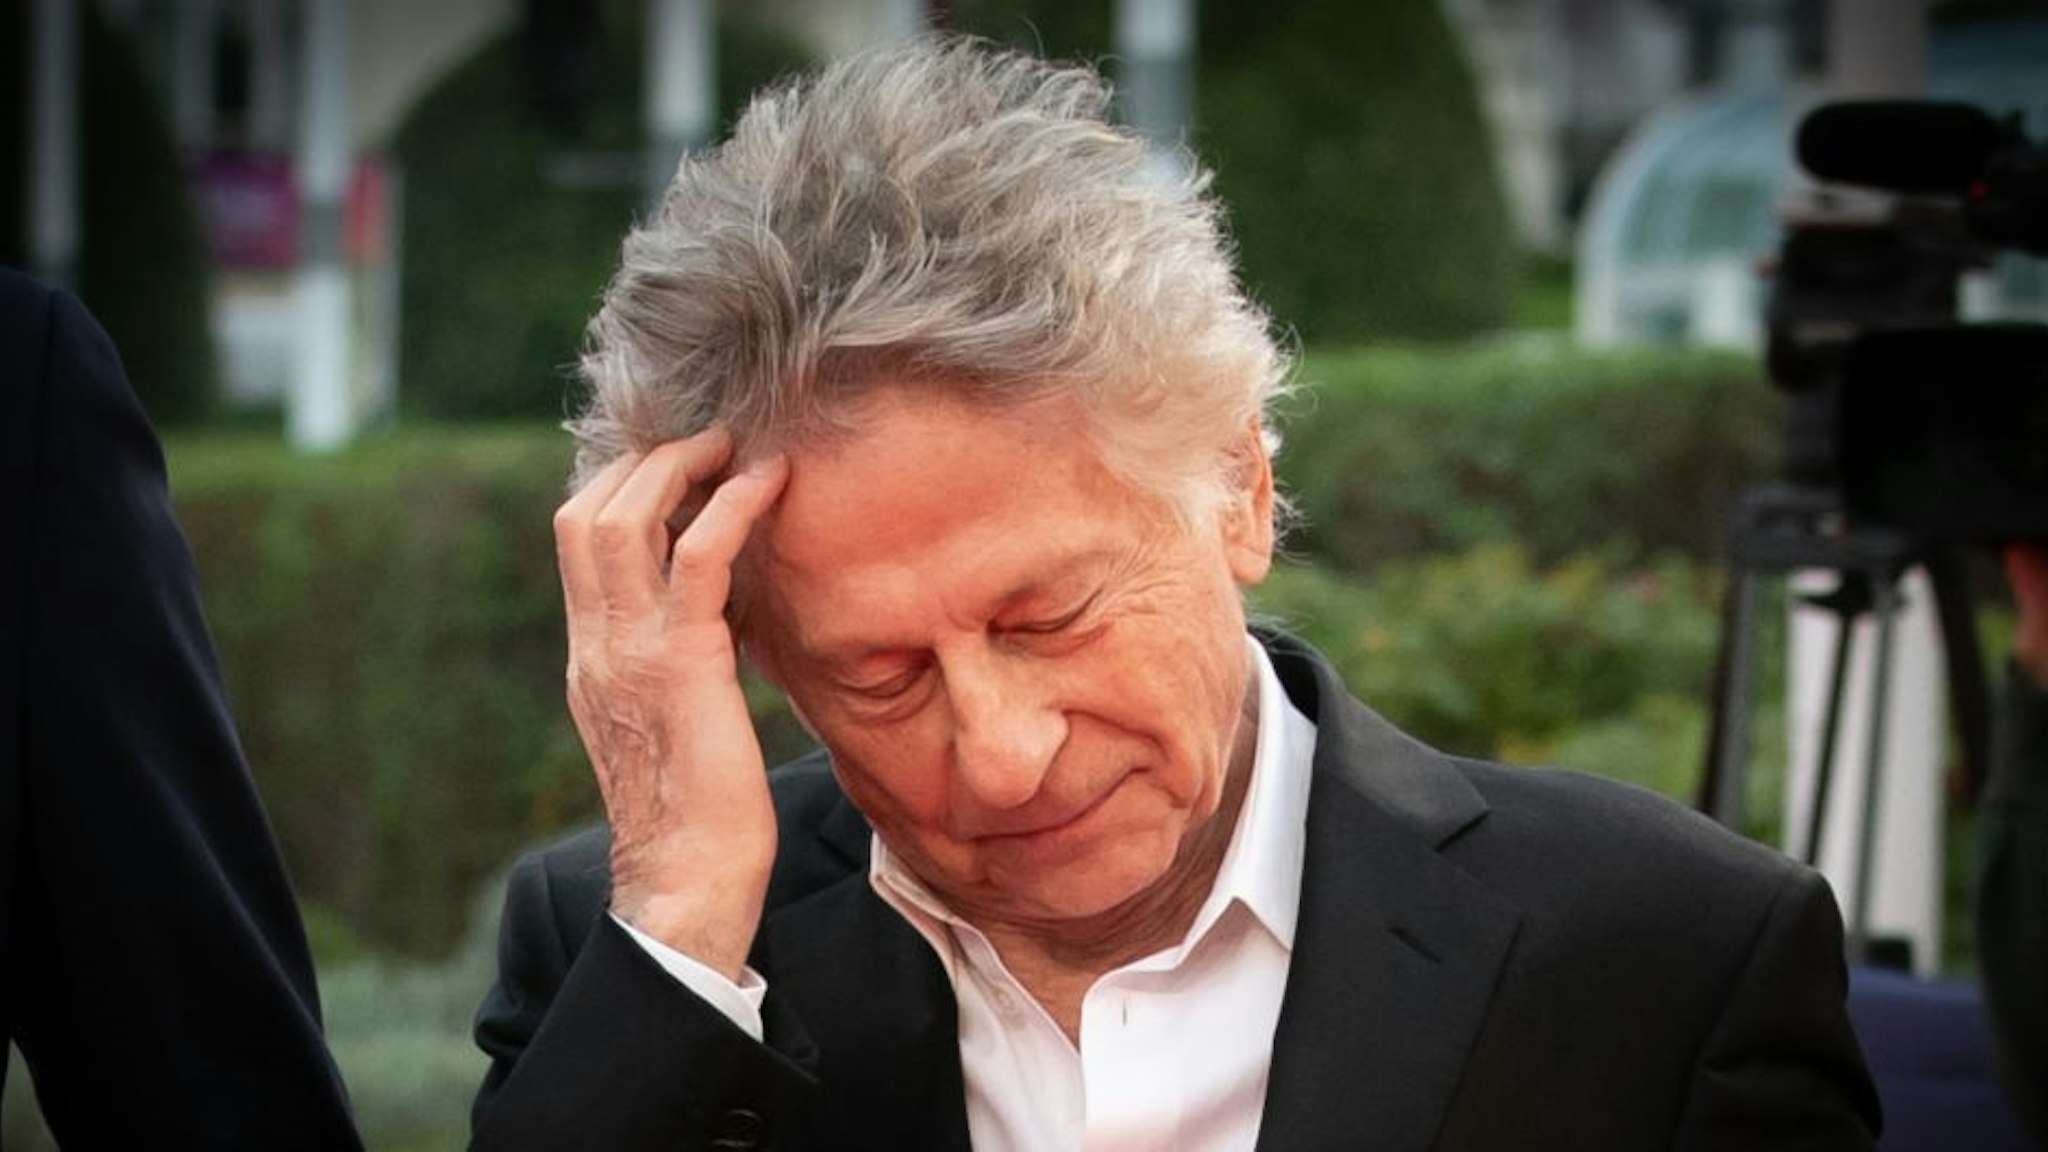 French-Polish director Roman Polanski stands on the red carpet of the 45th Deauville US Film Festival, in Deauville, northern France on September 7, 2019. (Photo by Lou BENOIST / AFP) (Photo credit should read LOU BENOIST/AFP via Getty Images)